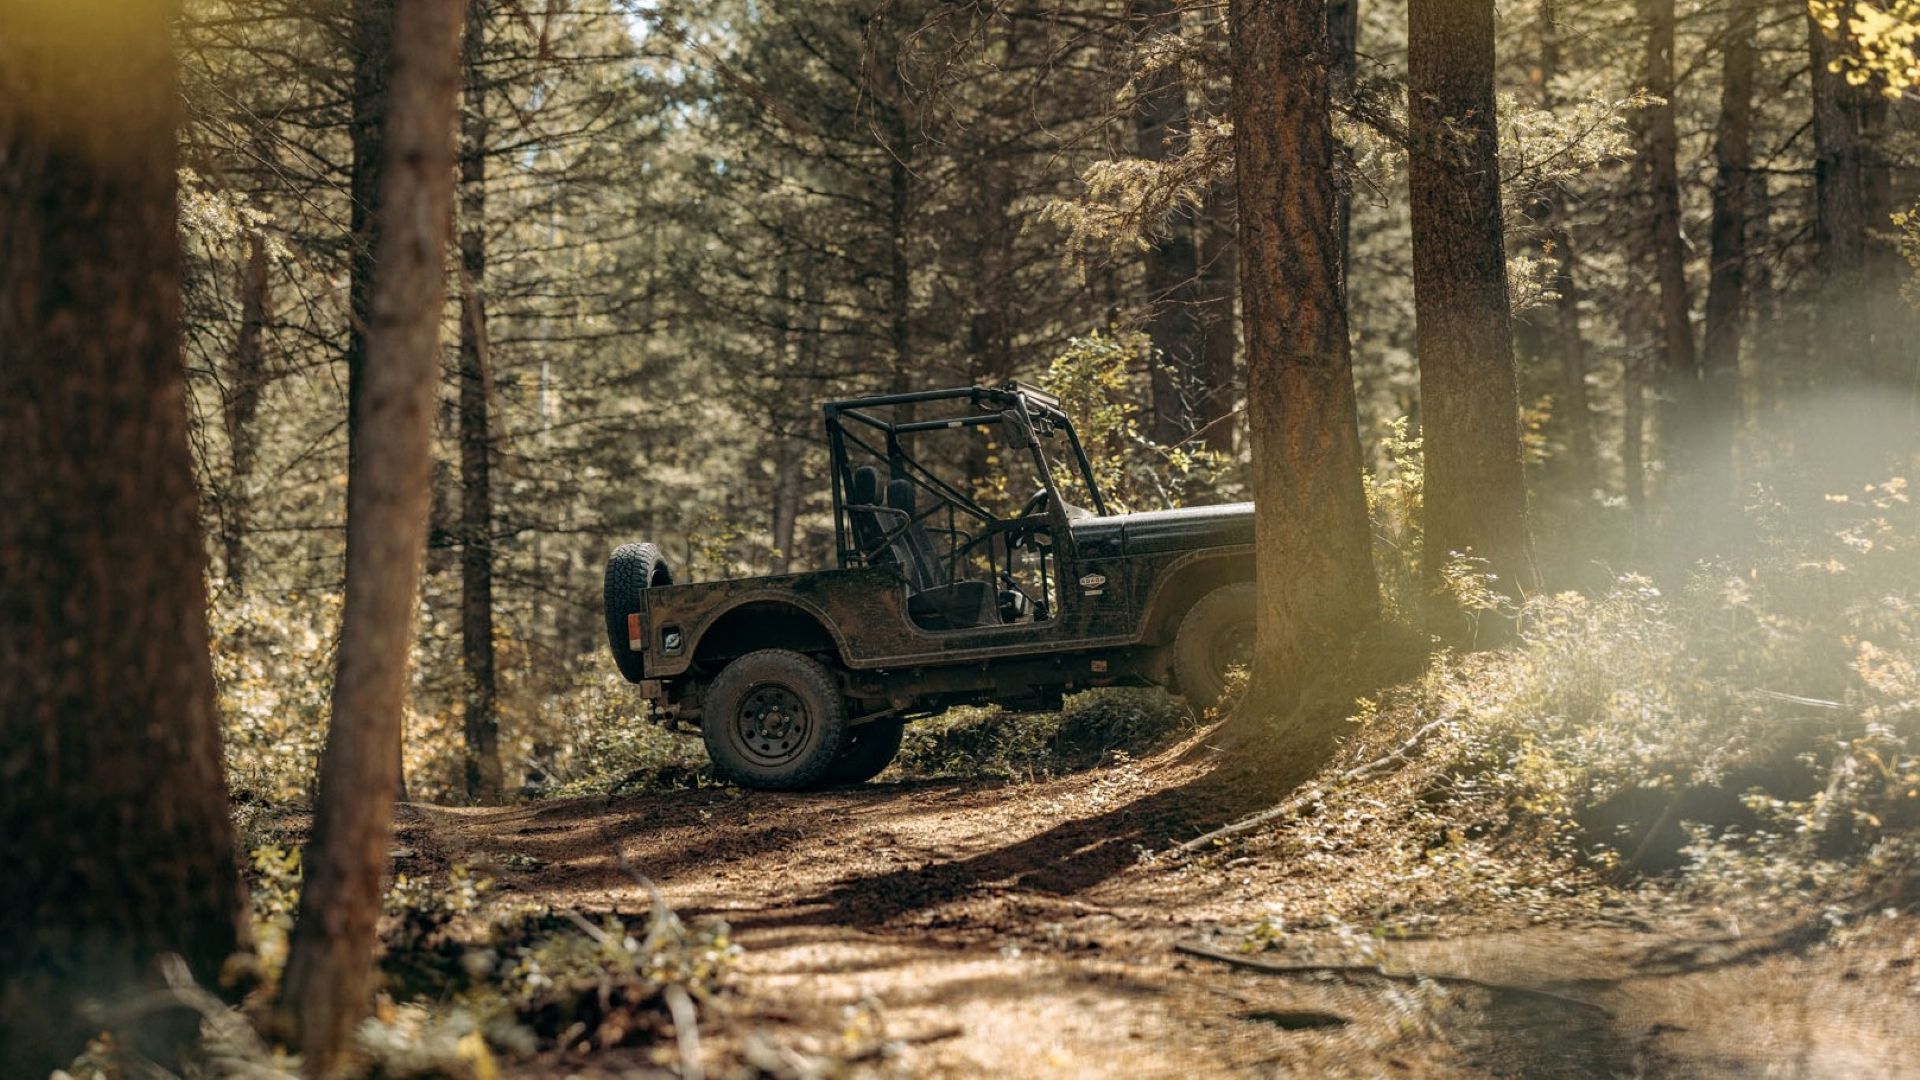 The 2023 Mahindra Roxor off-roading in a forest